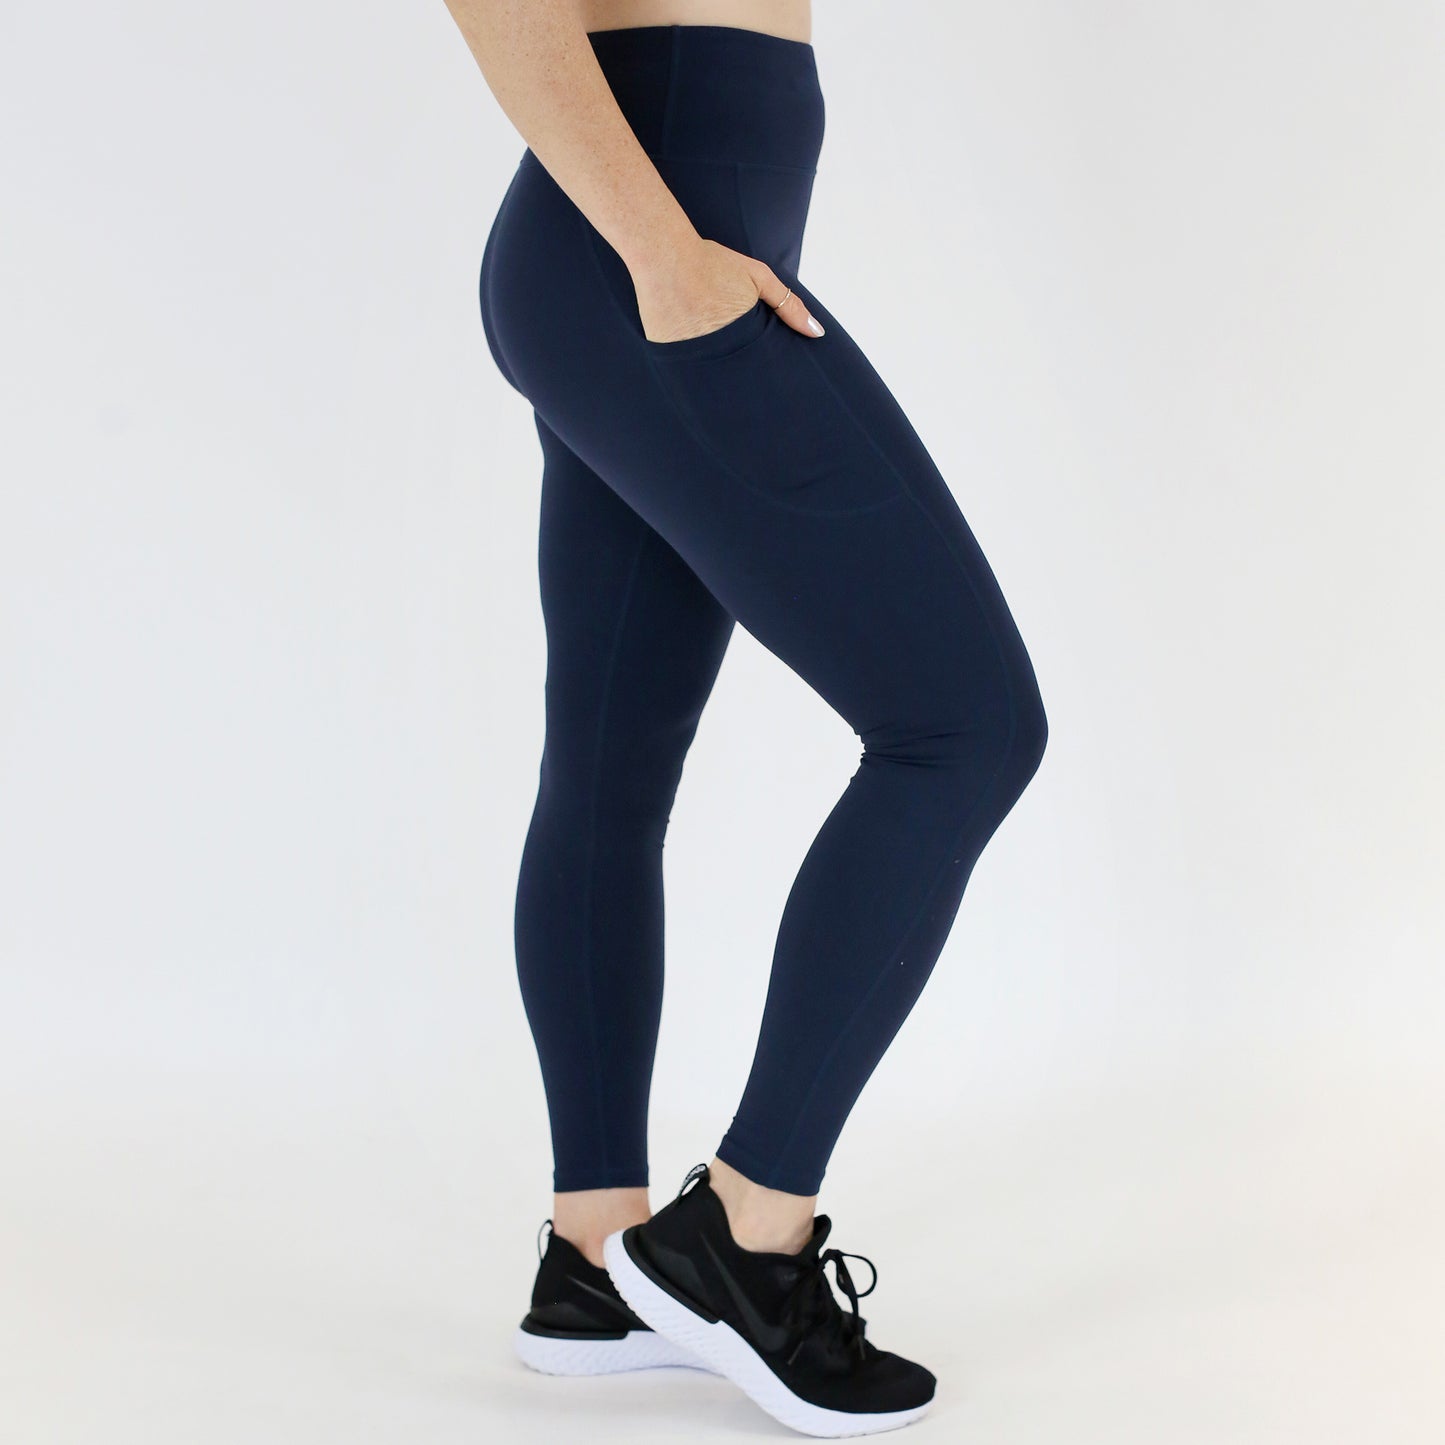 COOLOMG Women Leggings High Waisted Yoga Pants with Side Pocket Grey/Navy  Blue